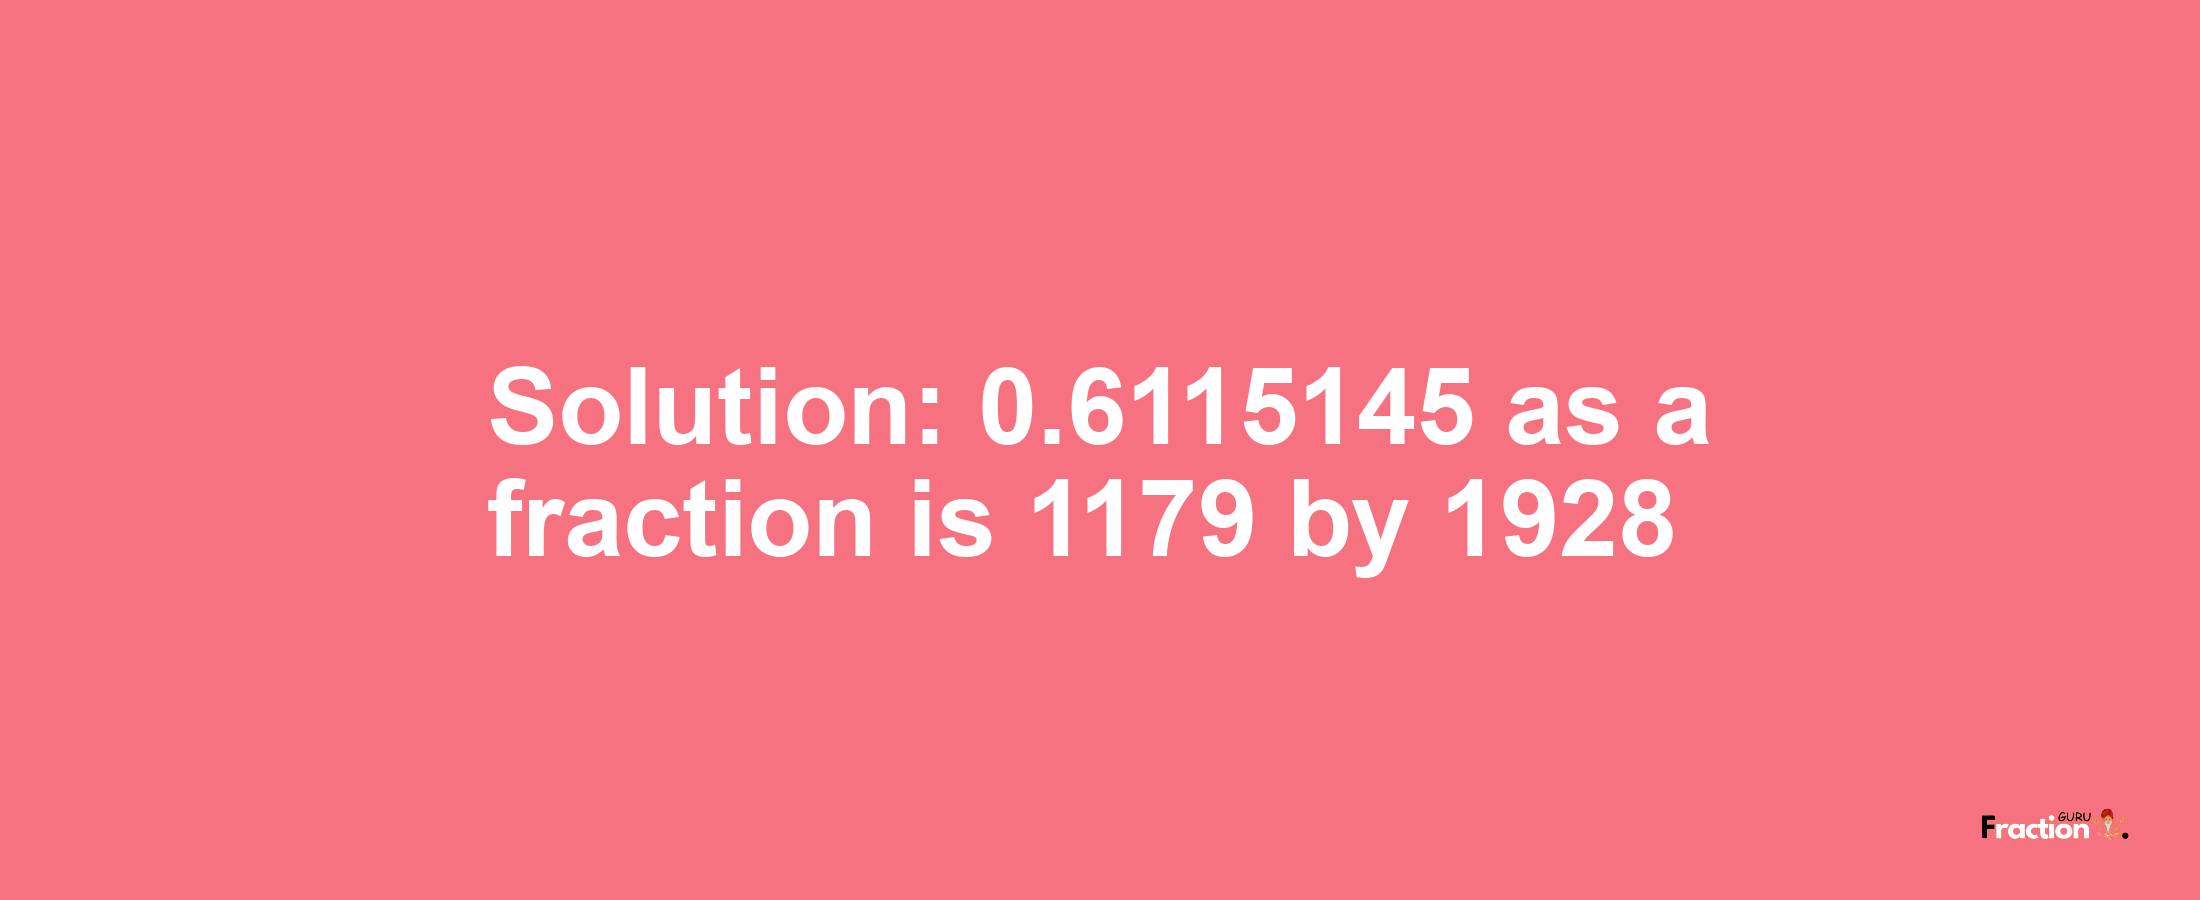 Solution:0.6115145 as a fraction is 1179/1928